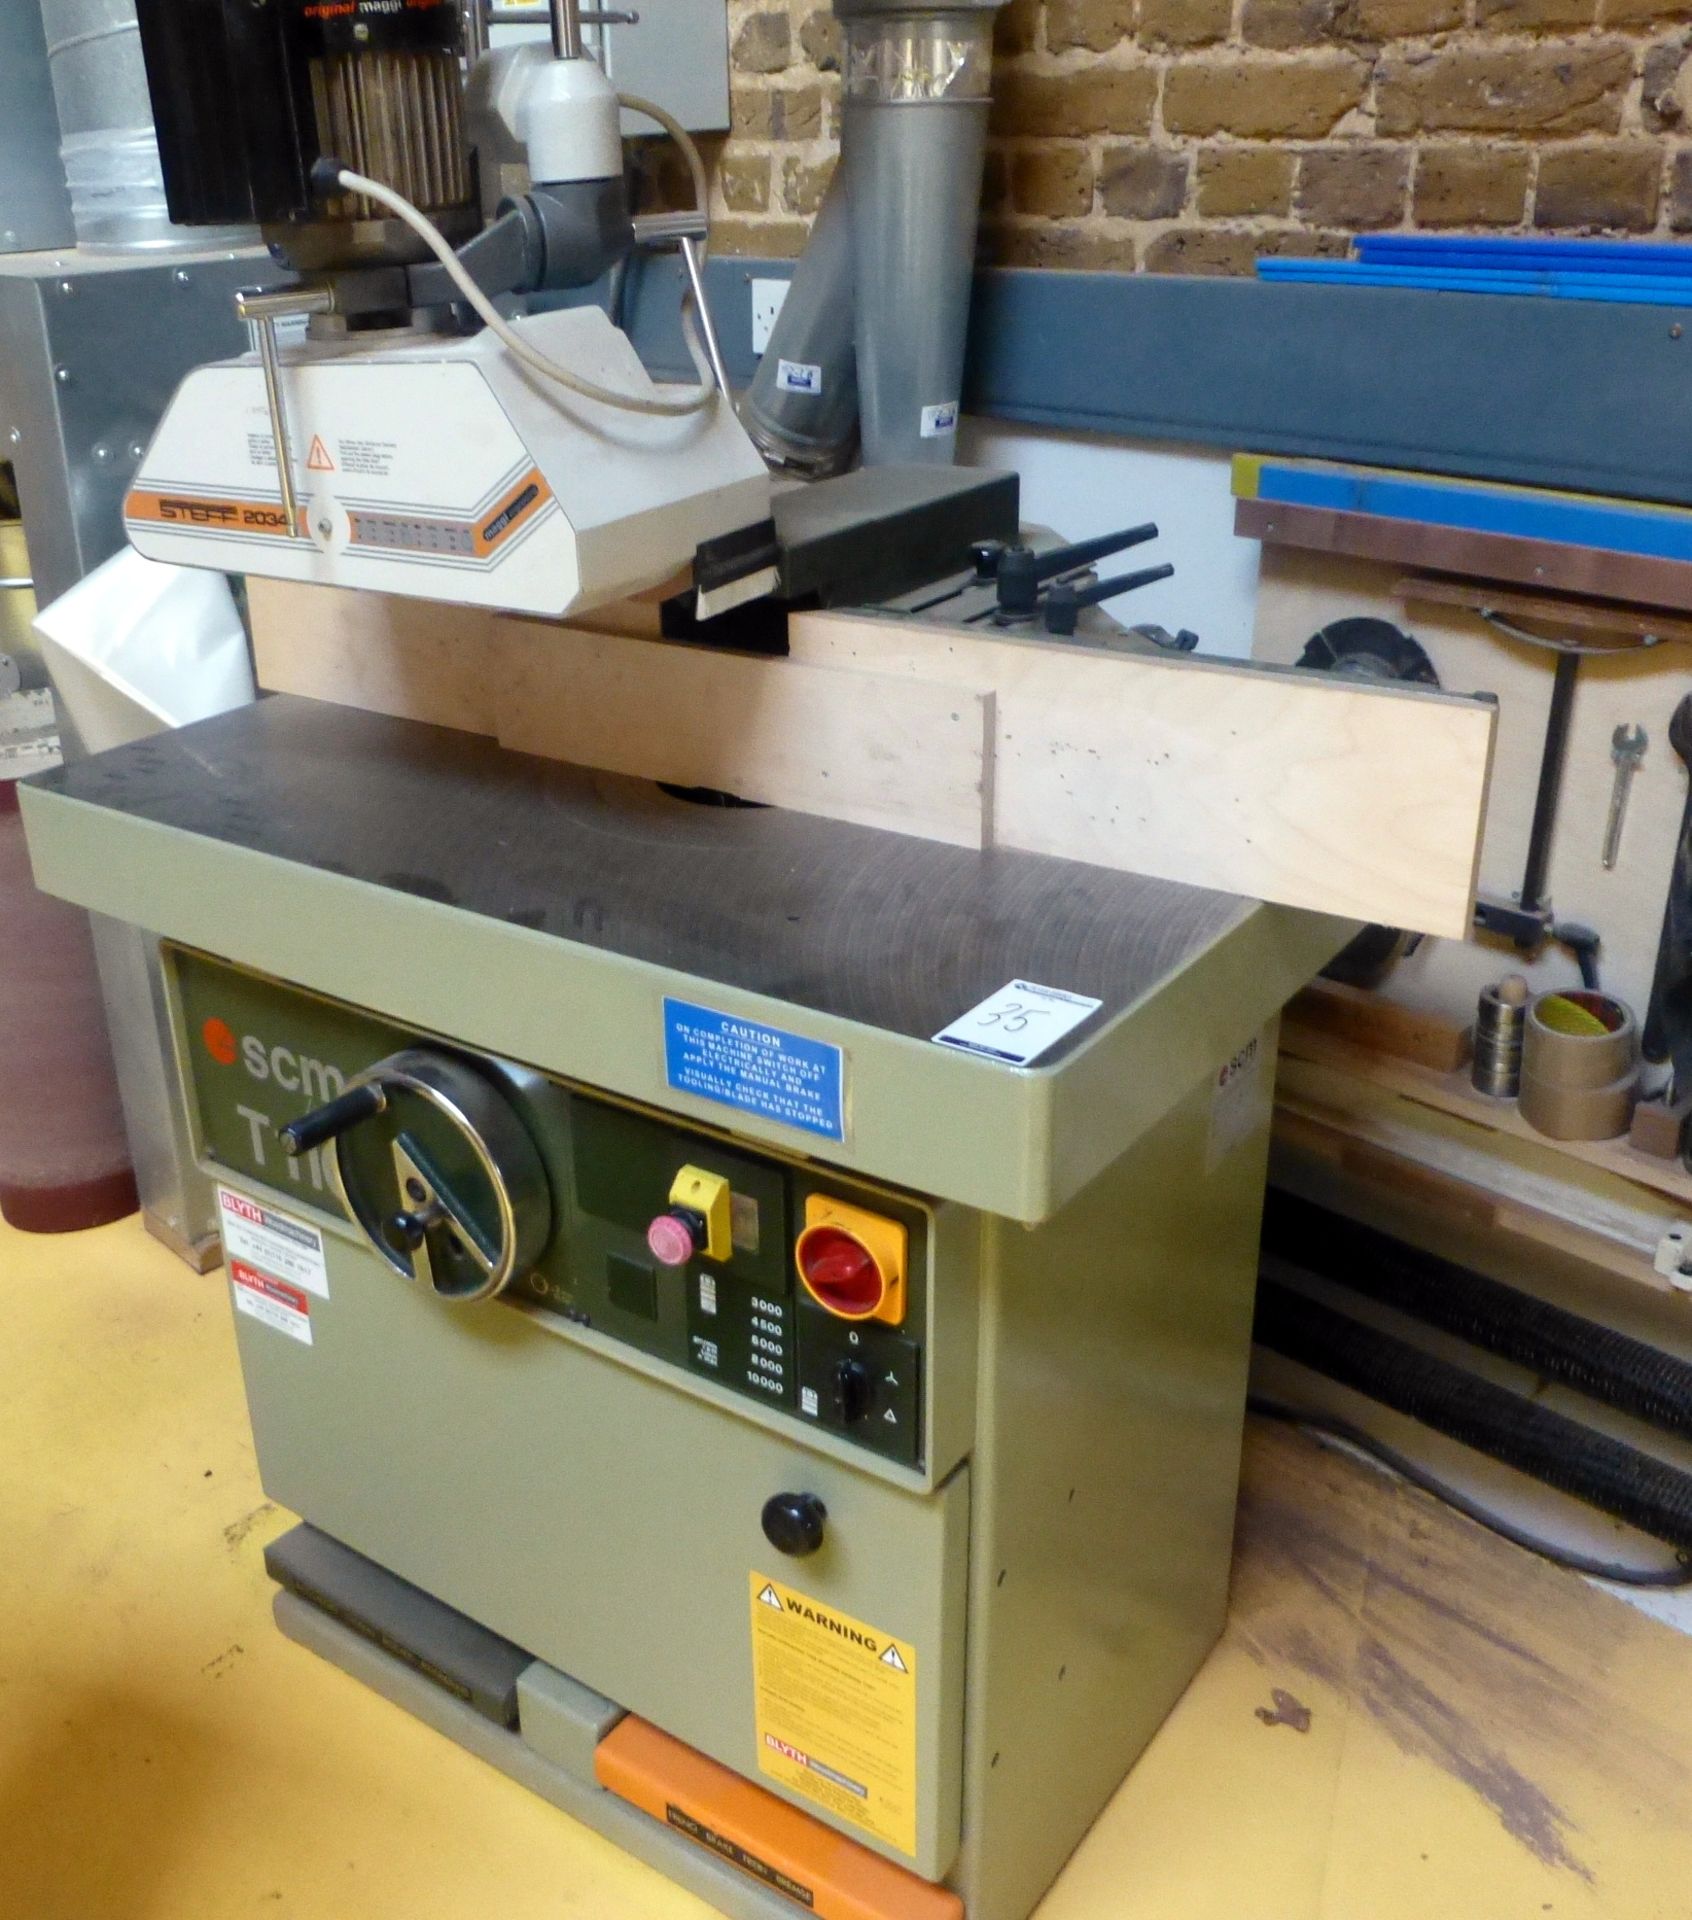 SCM T110B Spindle Moulder, Serial No: AB1/5729 with Steff 2034 Power Feed Unit, Spare Cutter &